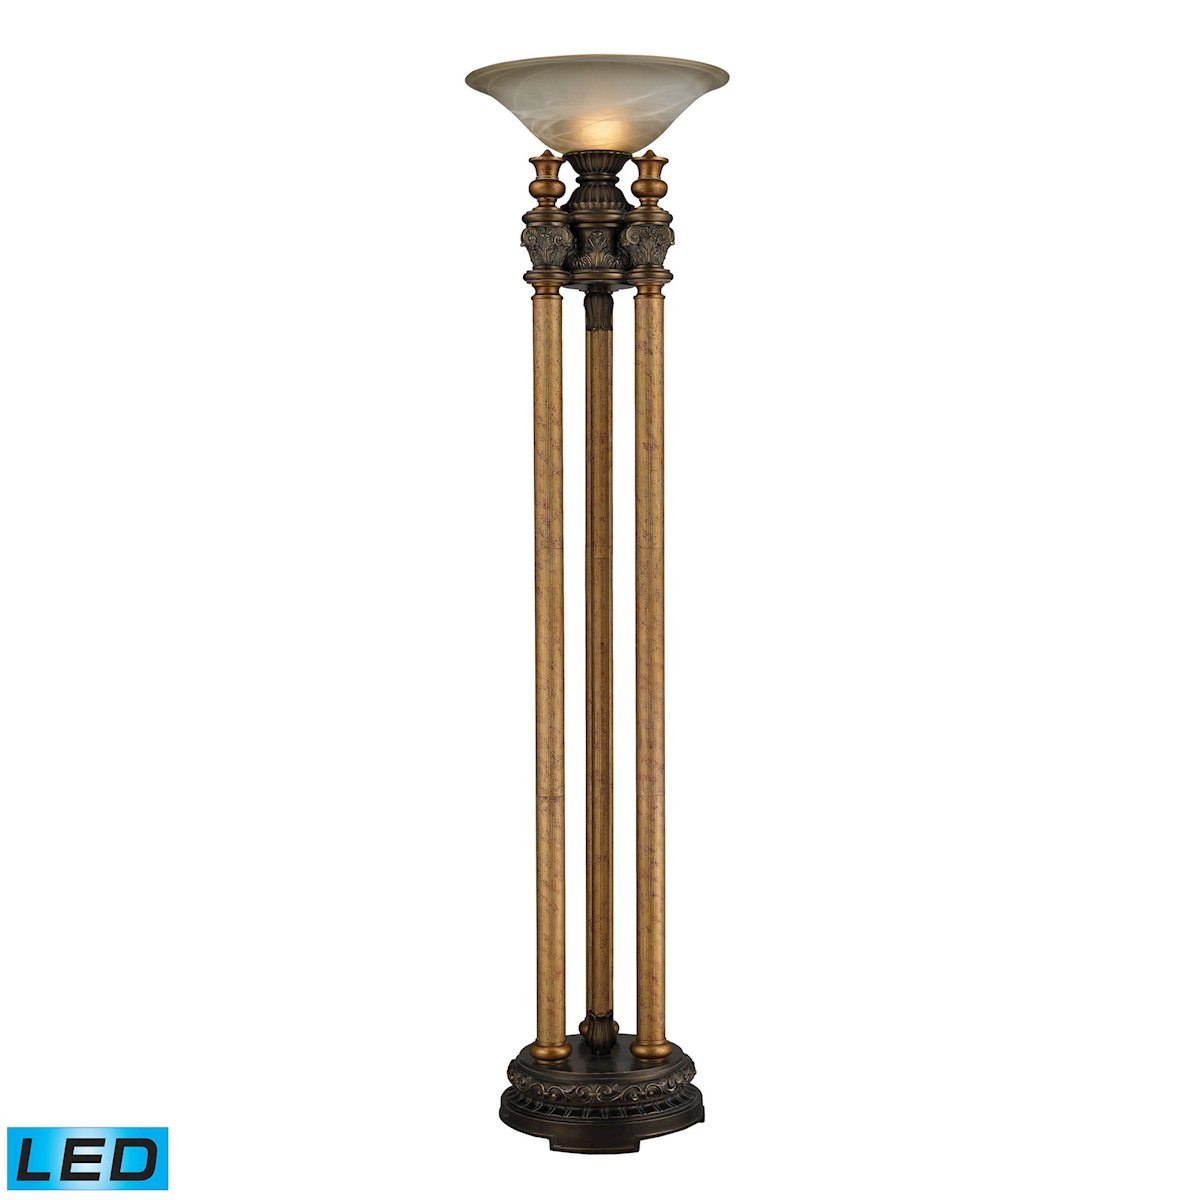 Athena 1 Light LED Torchiere Floor Lamp In Athena Bronze Lamps Dimond Lighting 